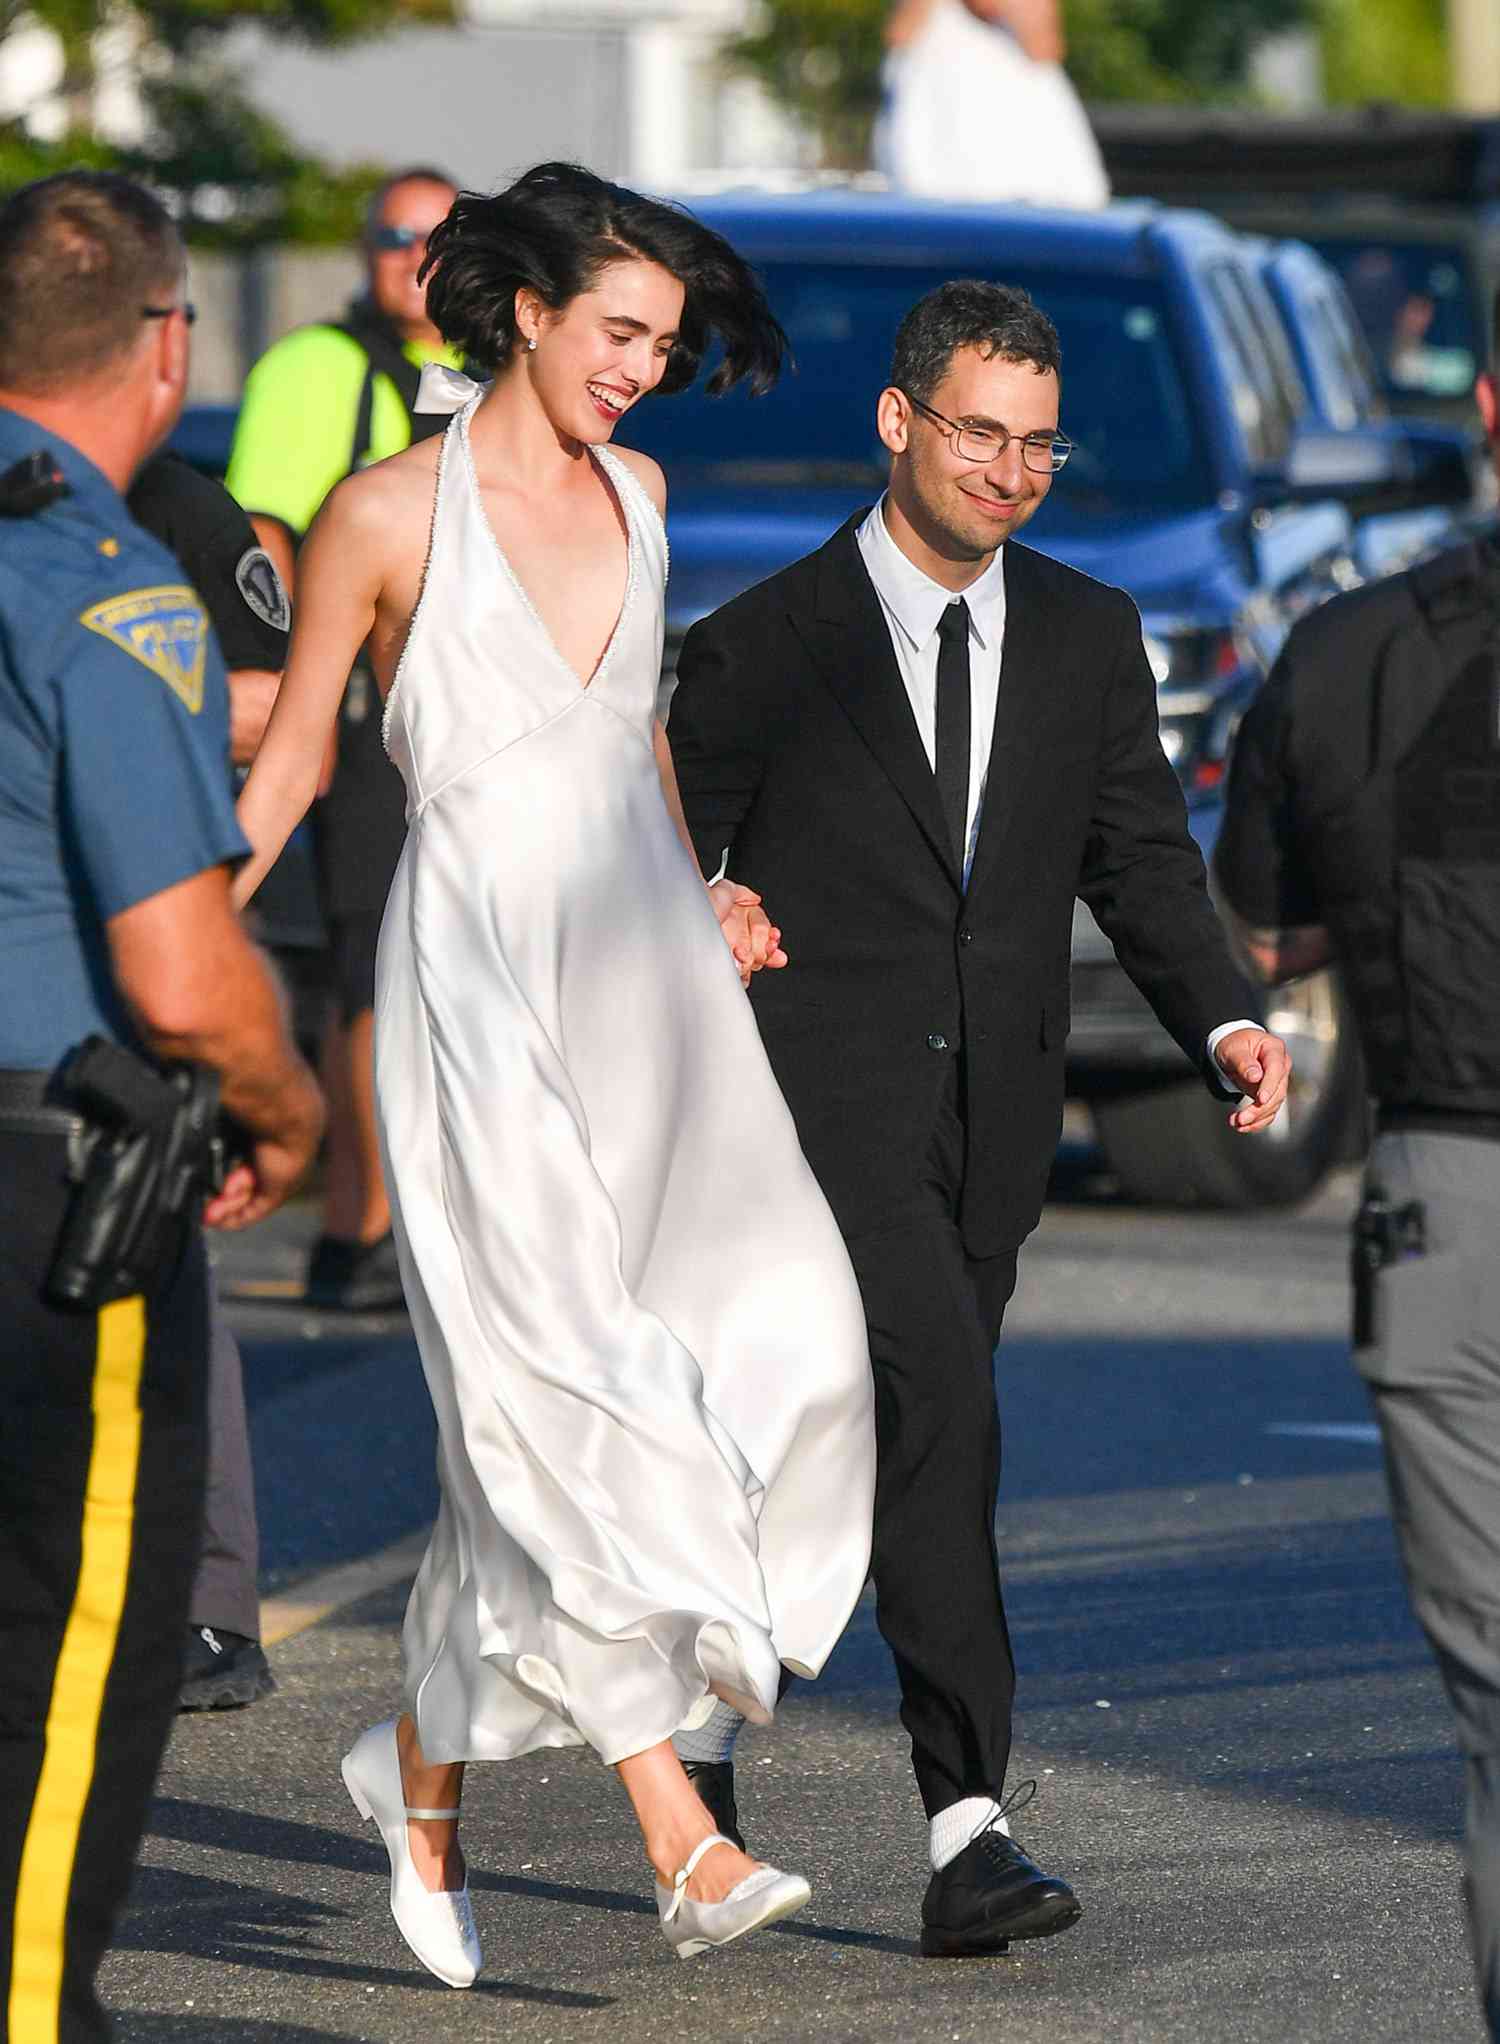 Jack Antonoff and Margaret Qualley are all smiles as they are spotted just after getting married in Beach Haven, New Jersey